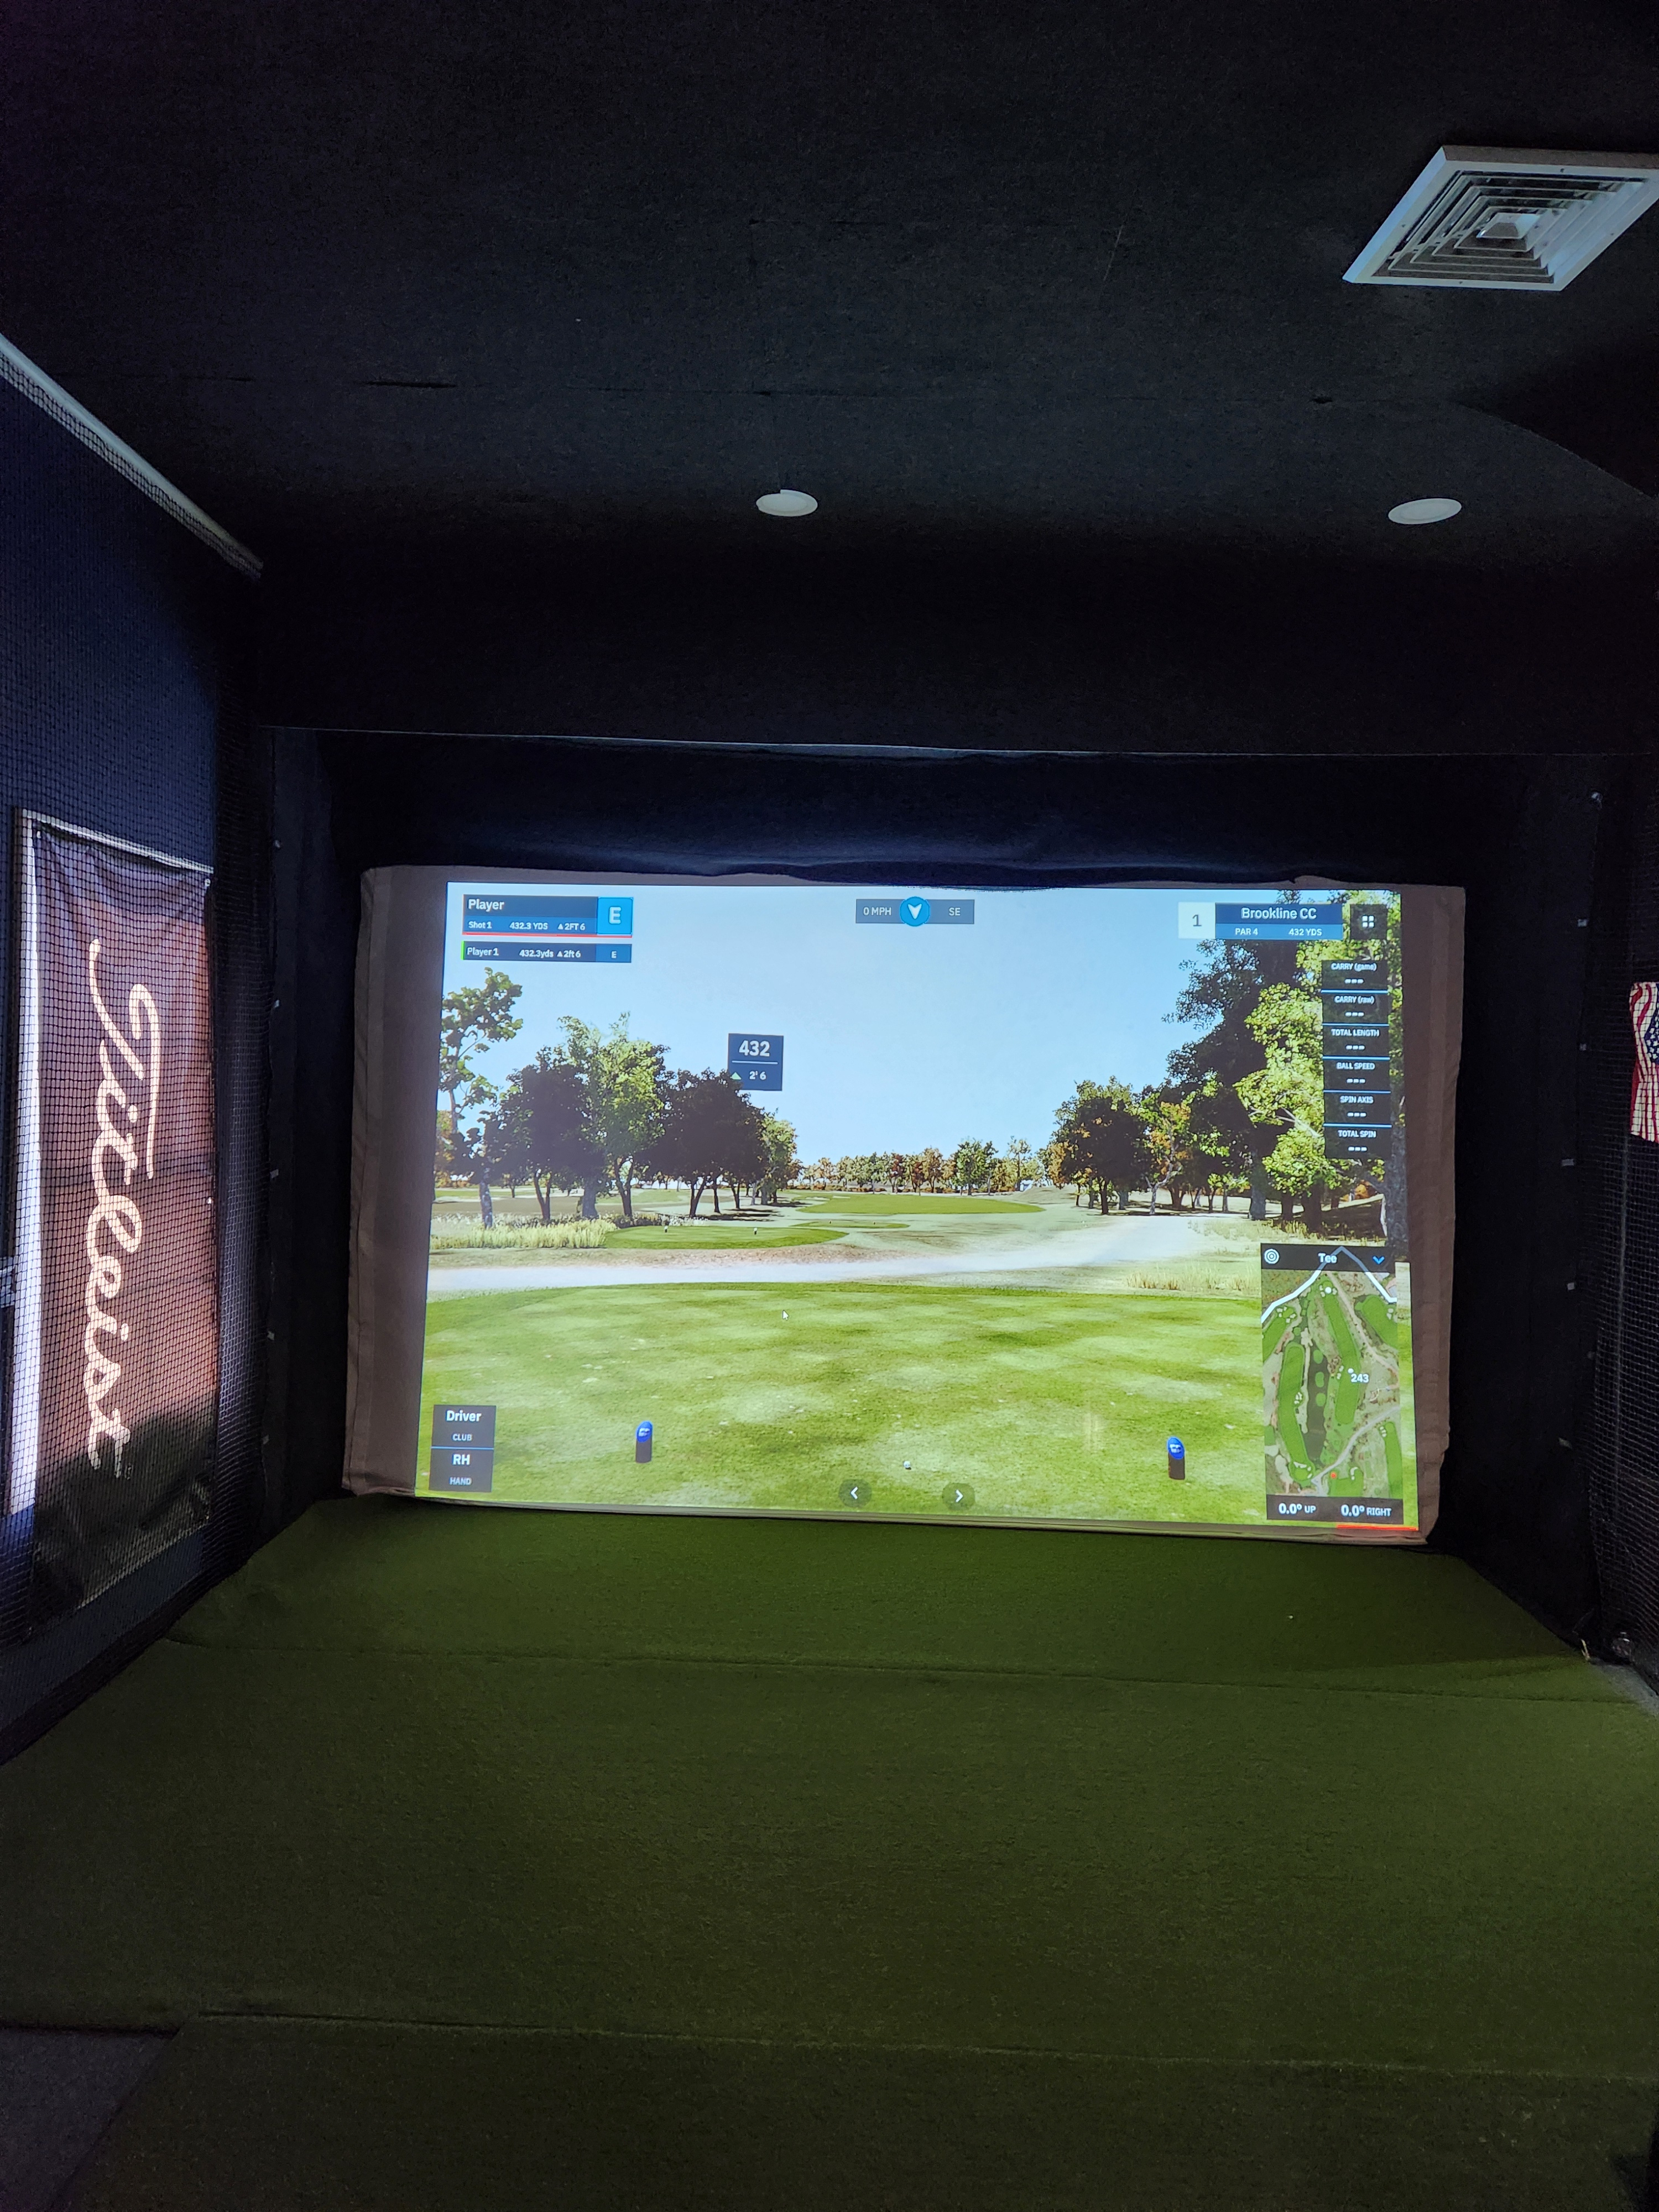 Country-Club-Of-New-Bedford Golf-Course-Golf-Simulators December-2023-Country-Club-Of-New-Bedford-Golf-Course-Golf-Simulators December-2023-CCNB-Golf-Simulators-Image-Gallery-NEW-Image-1